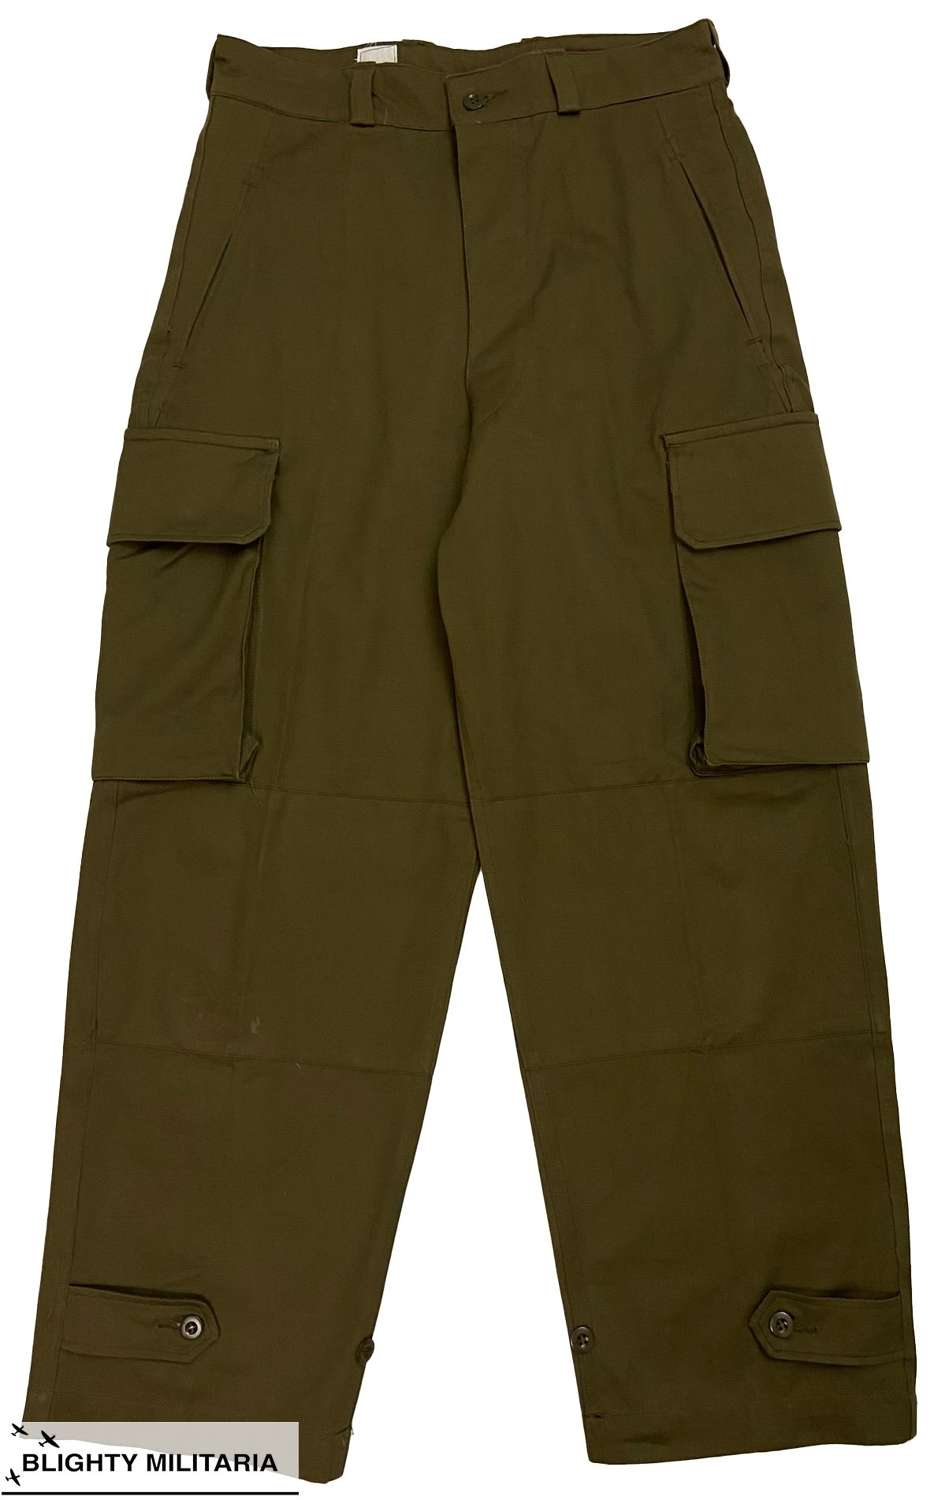 Original 1950s French Army M47 Combat Trousers 32x30